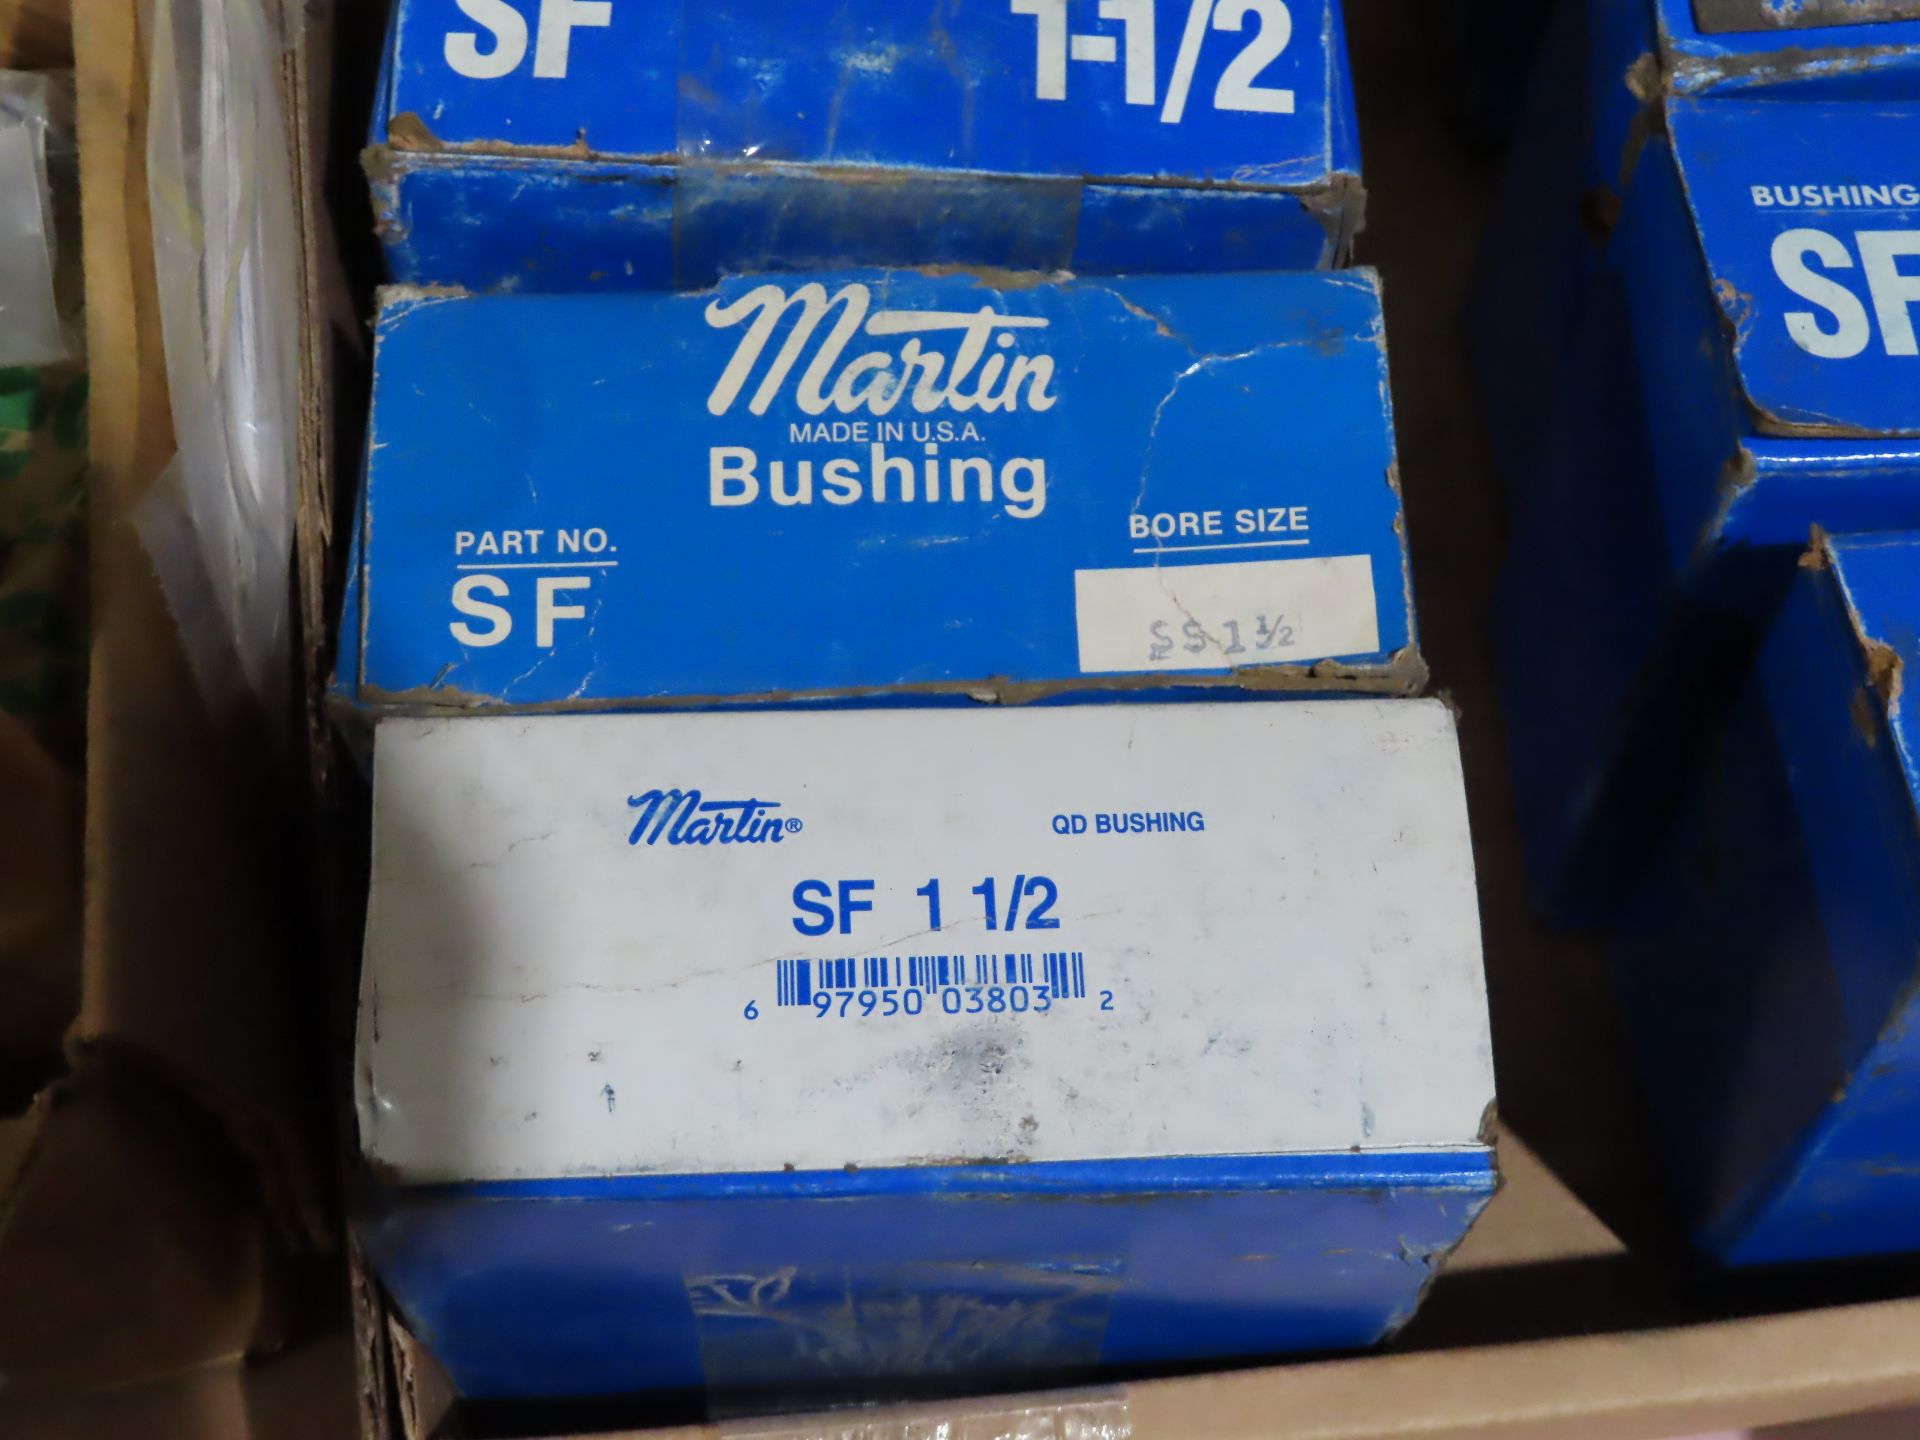 Qty 8 Martin bushing mode SF1 1/2, new in boxes, as always with Brolyn LLC auctions, all lots can be - Image 2 of 2